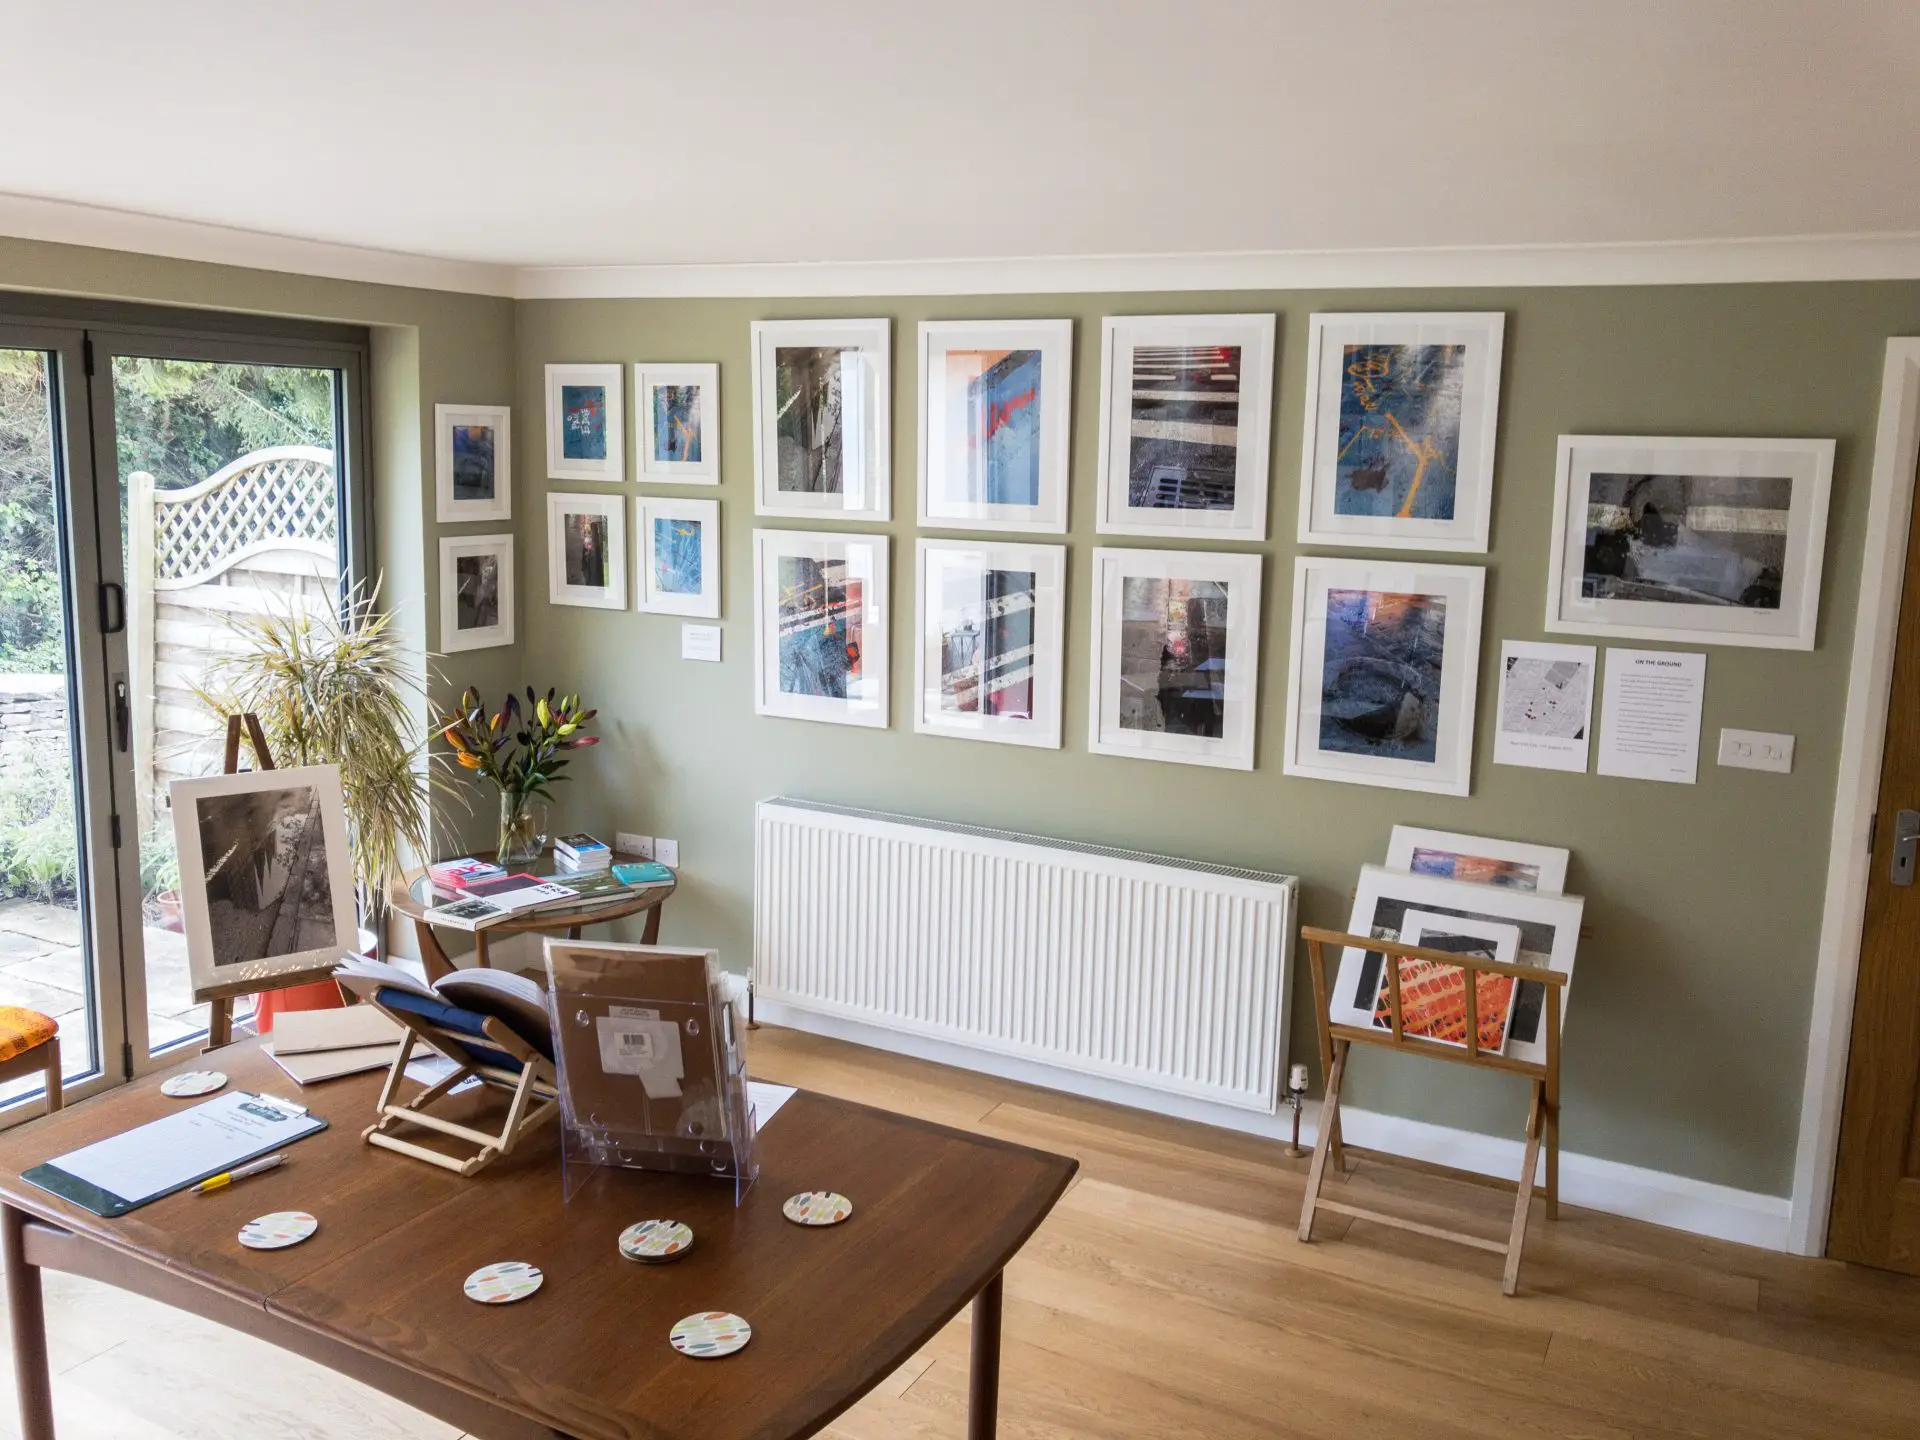 Framed photographs on the wall at home in an open-studio event